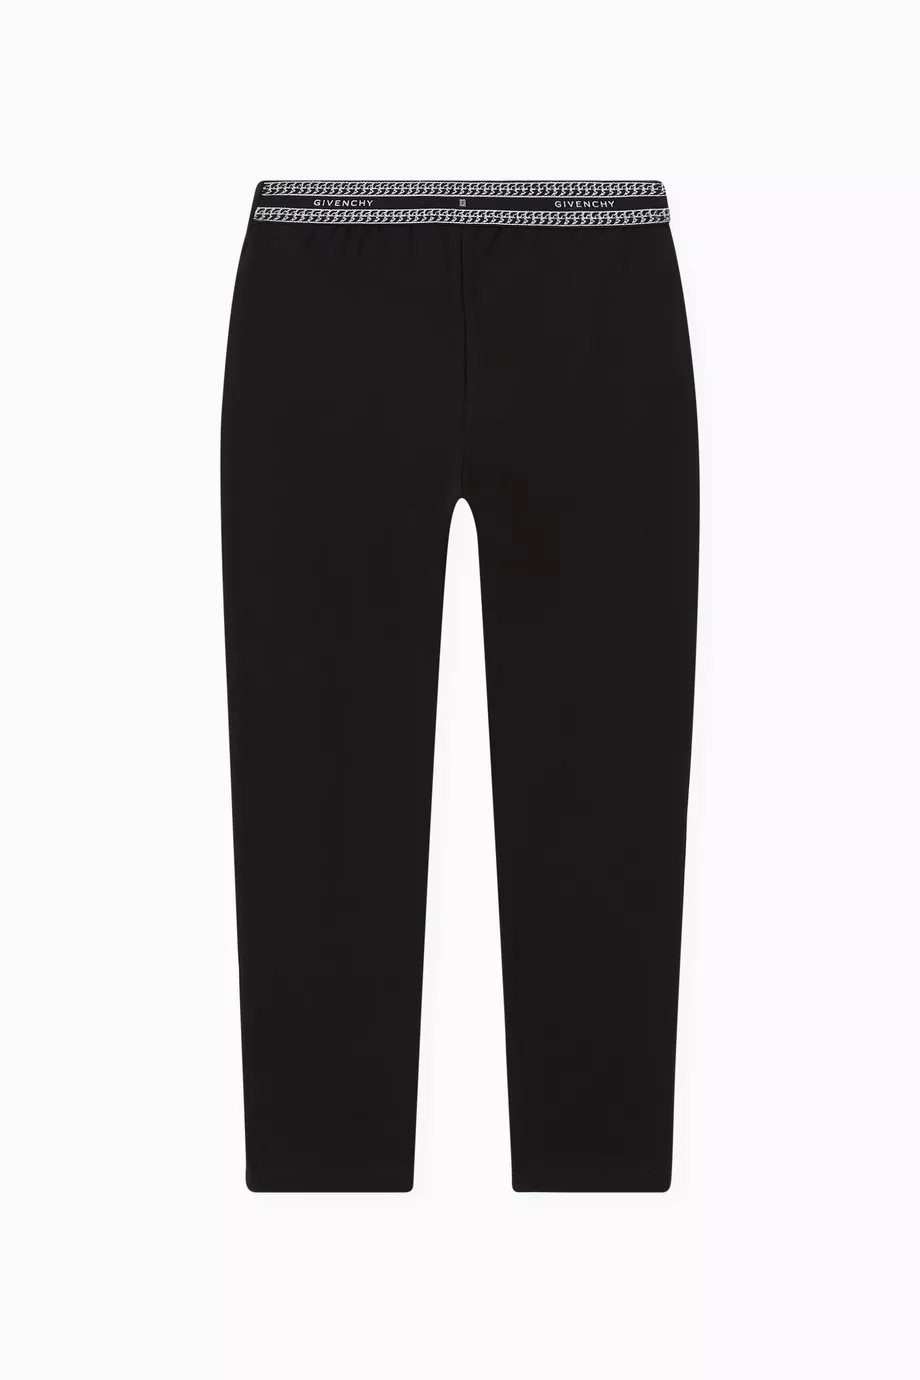 Buy Givenchy Black Logo Leggings in Stretch Jersey for Girls in UAE | Ounass